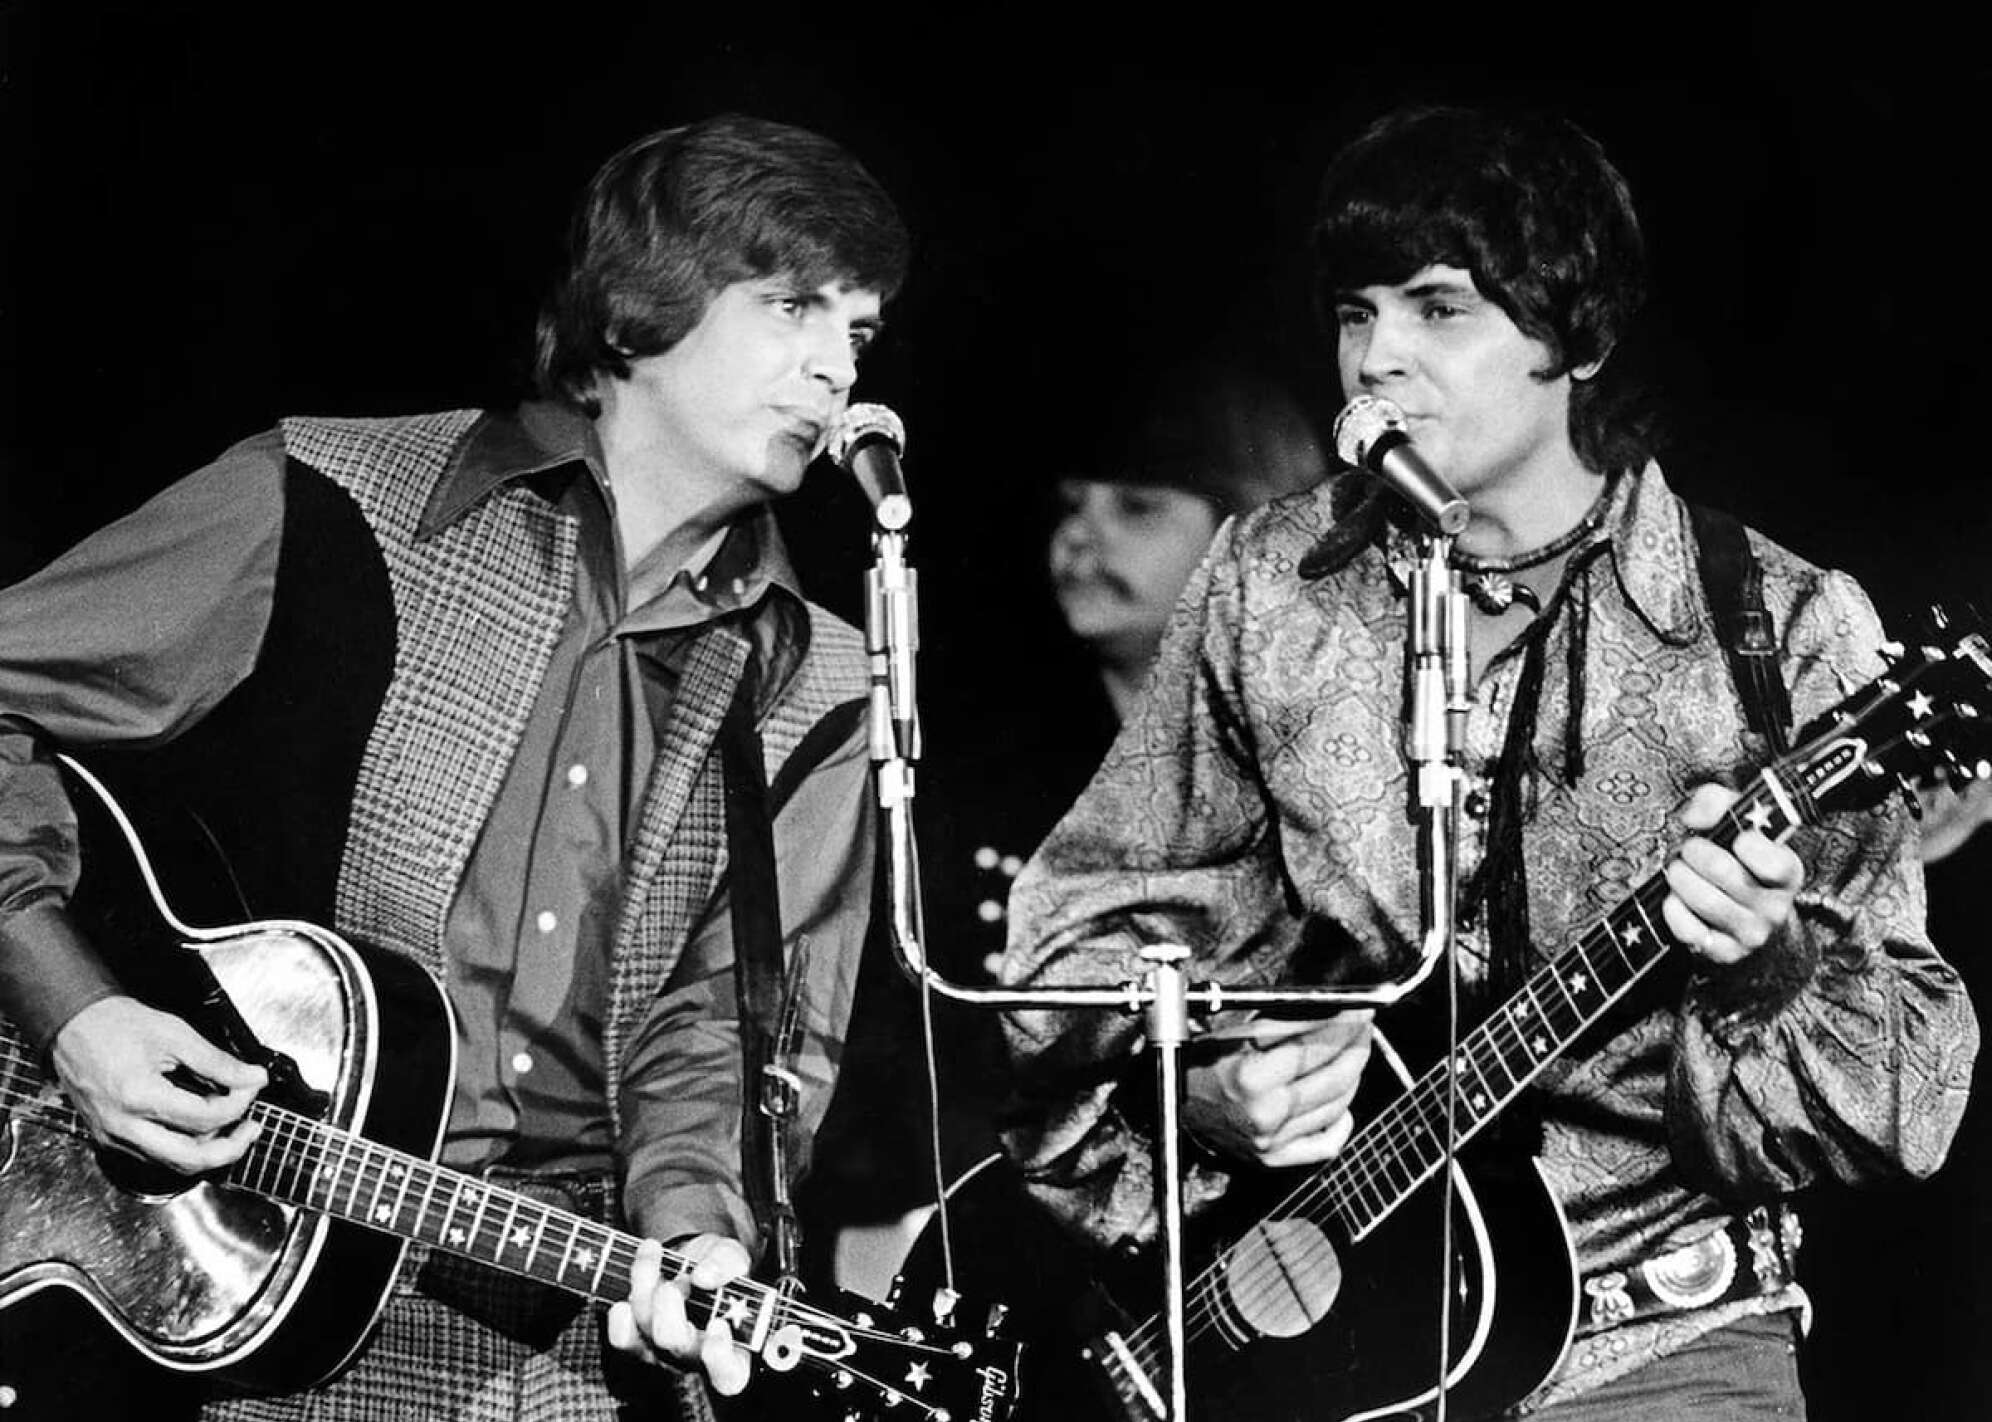 Don Everly – The Everly Brothers